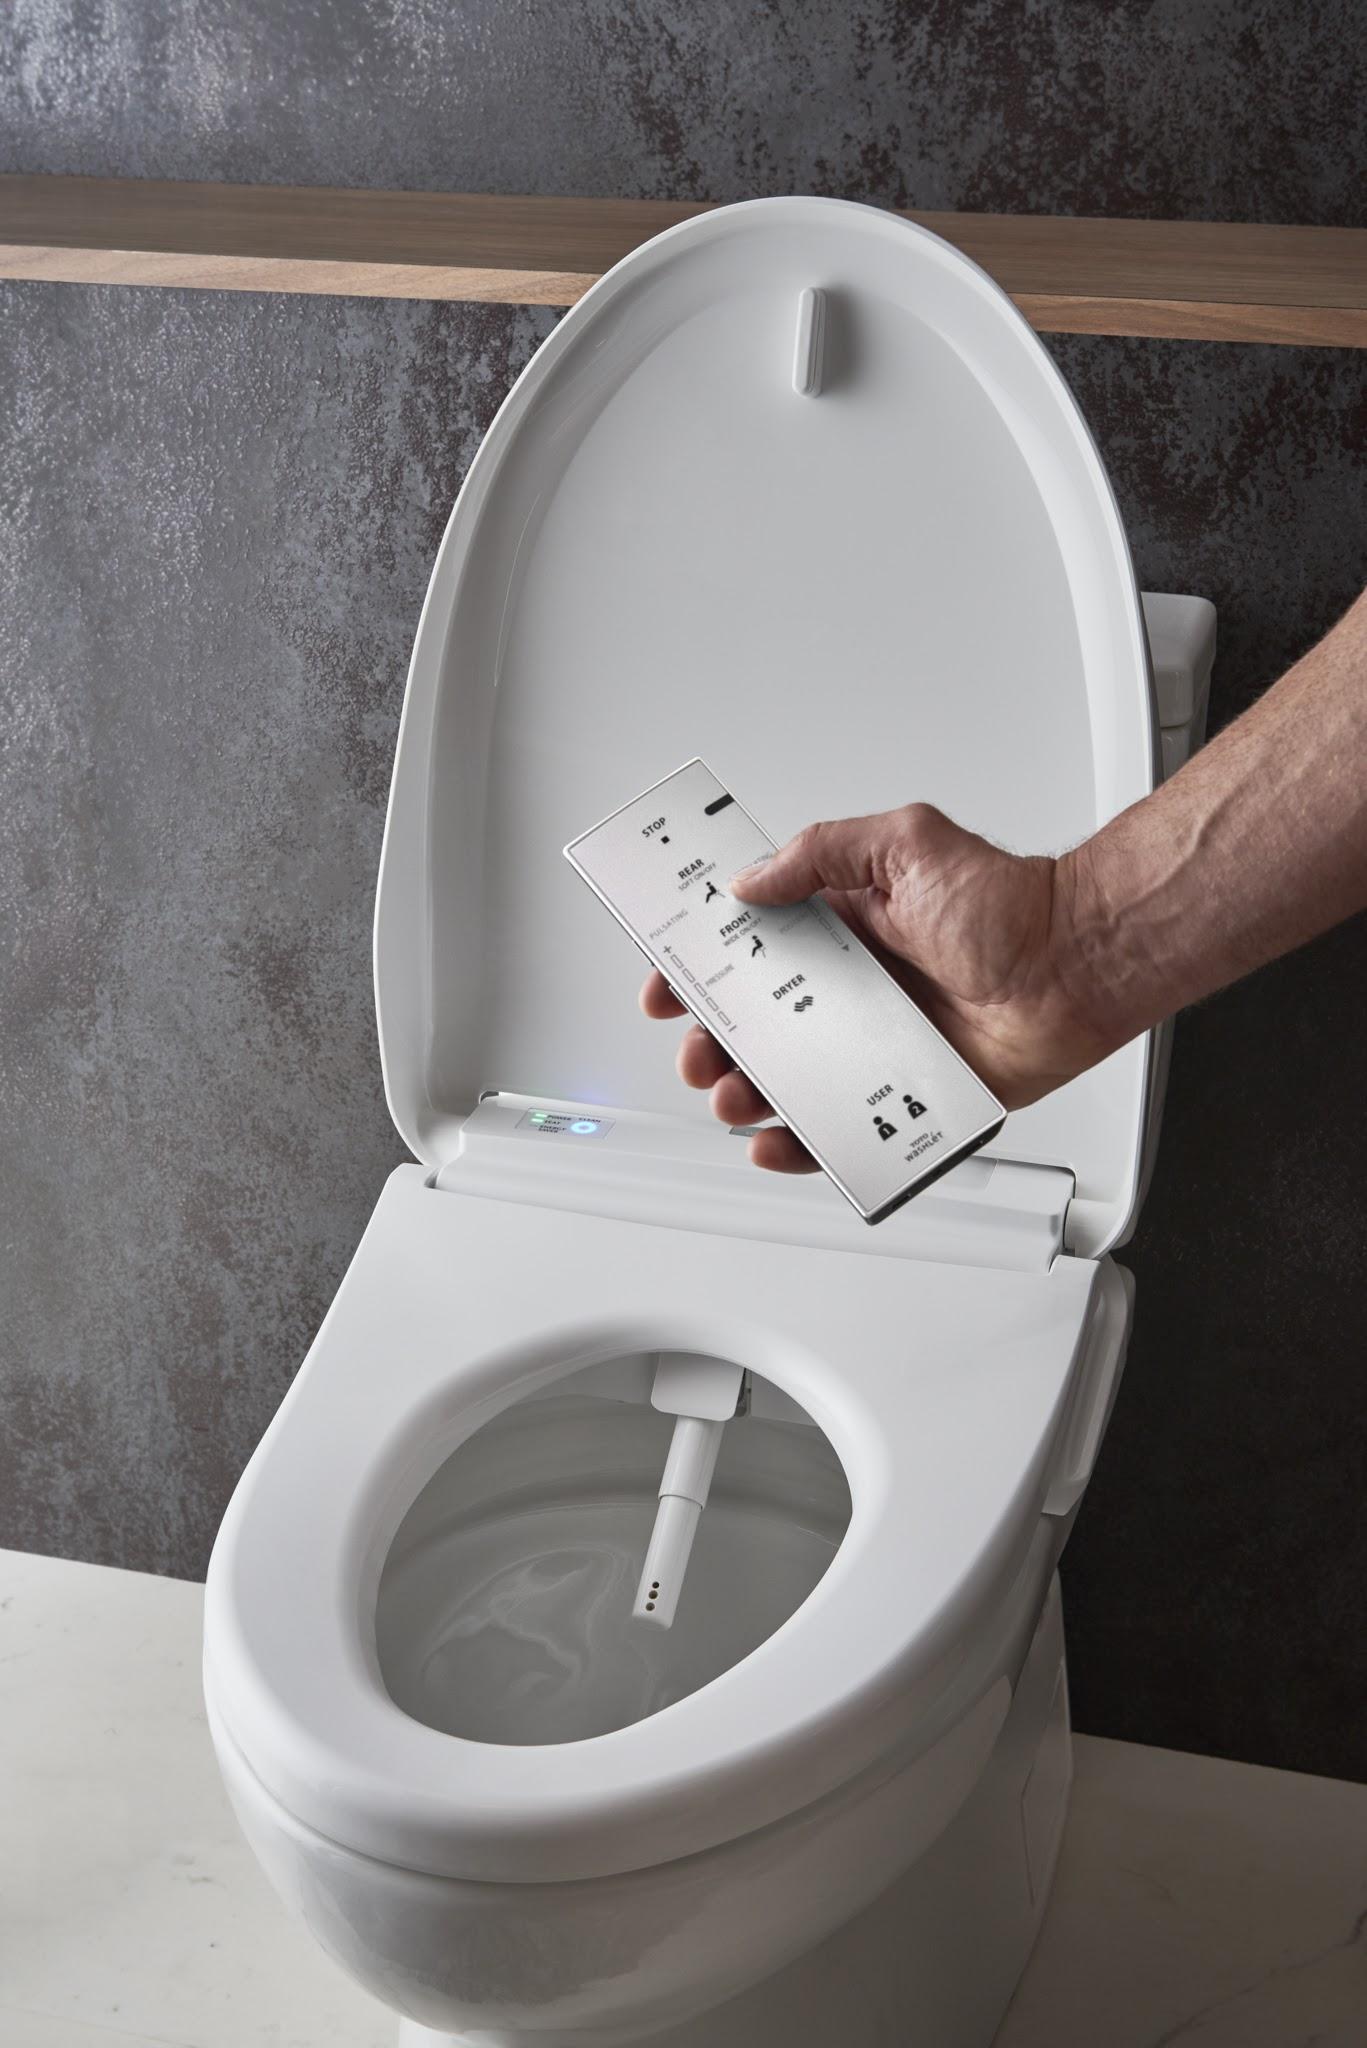 TOTO’s HighTech Toilet Combines Aesthetics With Performance